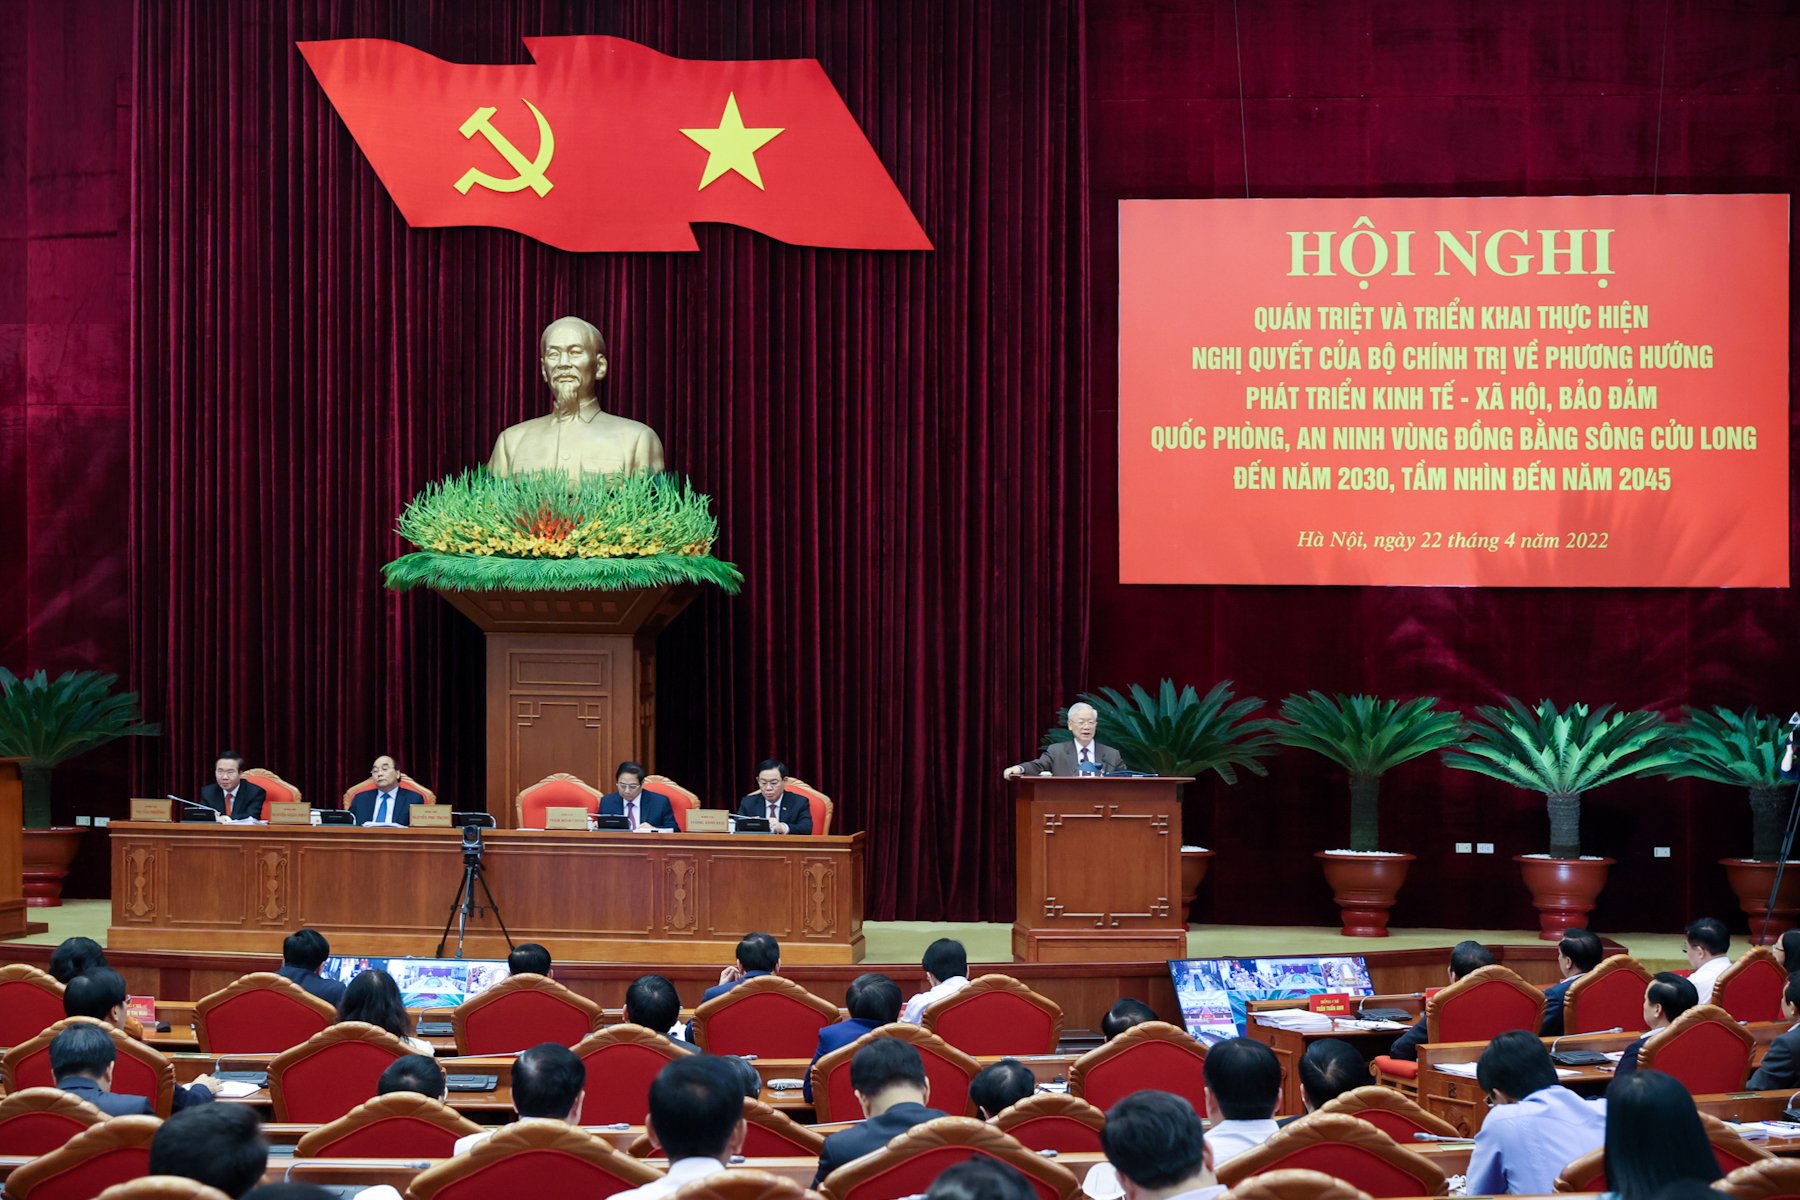 Party General Secretary Nguyen Phu Trong delivers a speech at the Conference on Mastering and Implementing Politburo's Resolution on Socio-economic Development Orientation, and National Defense and Security in Mekong Delta by 2030, with a vision to 2045.